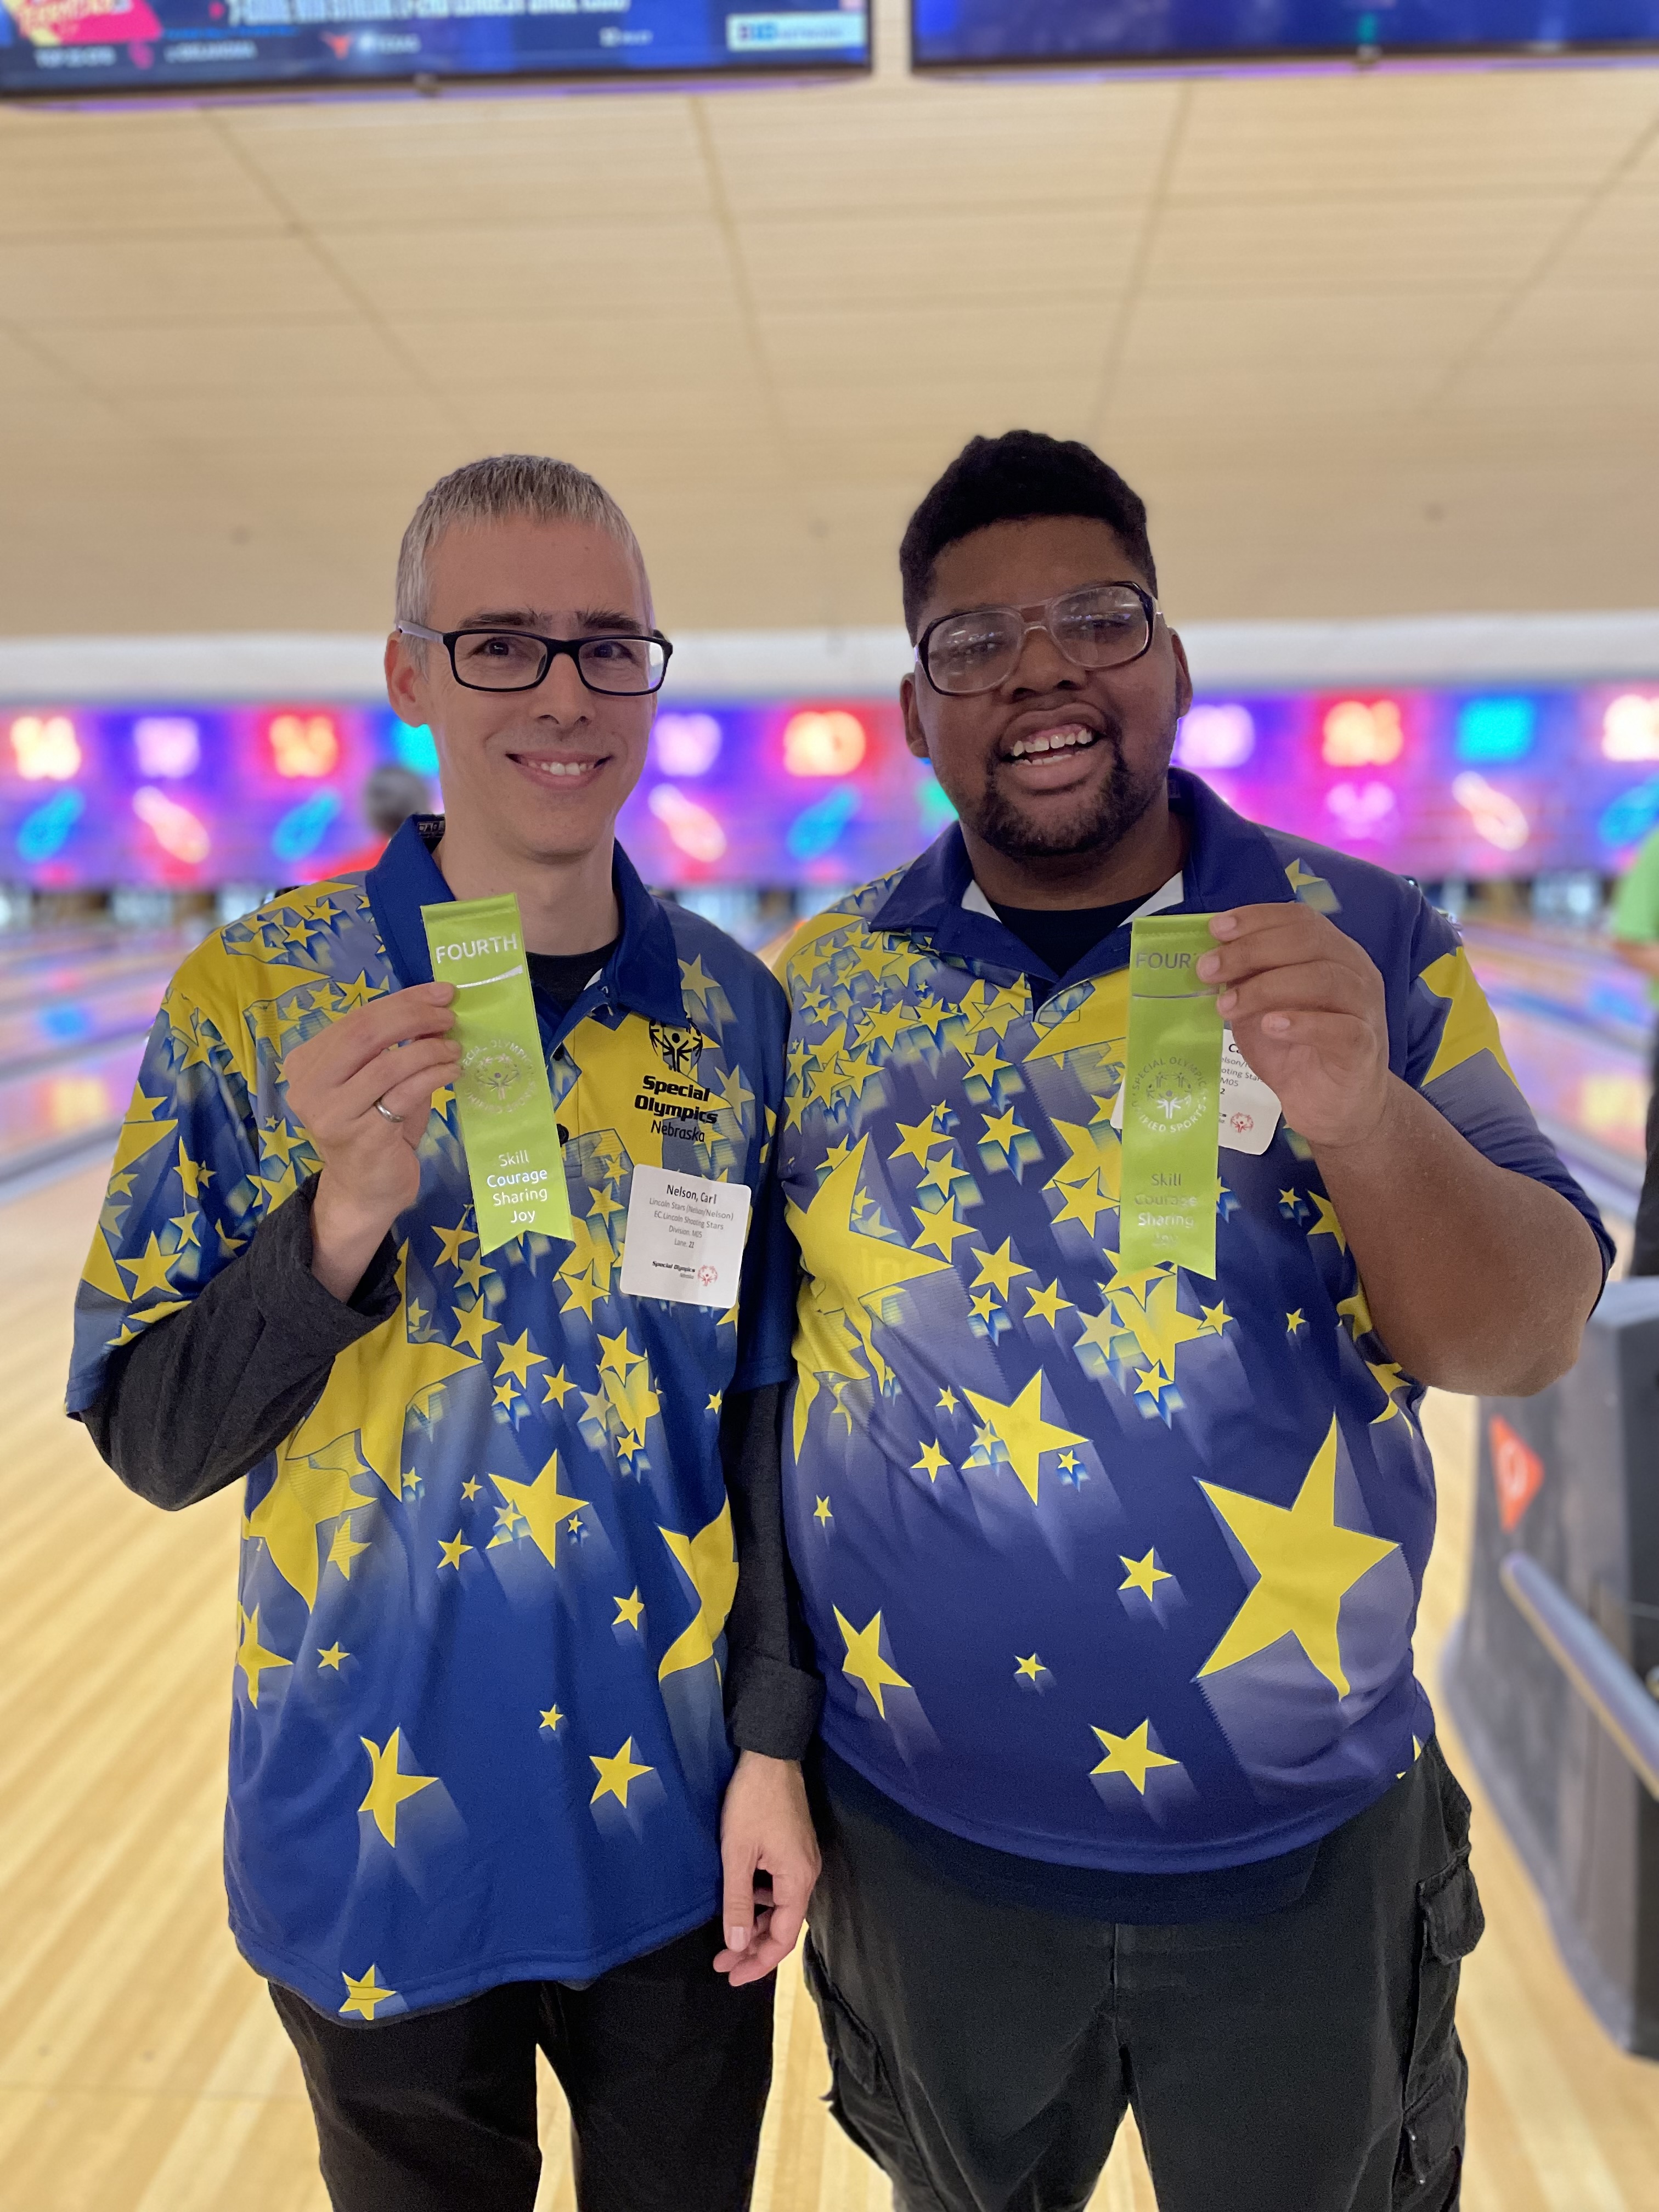 Two bowlers in uniform hold up ribbons in a bowling alley.